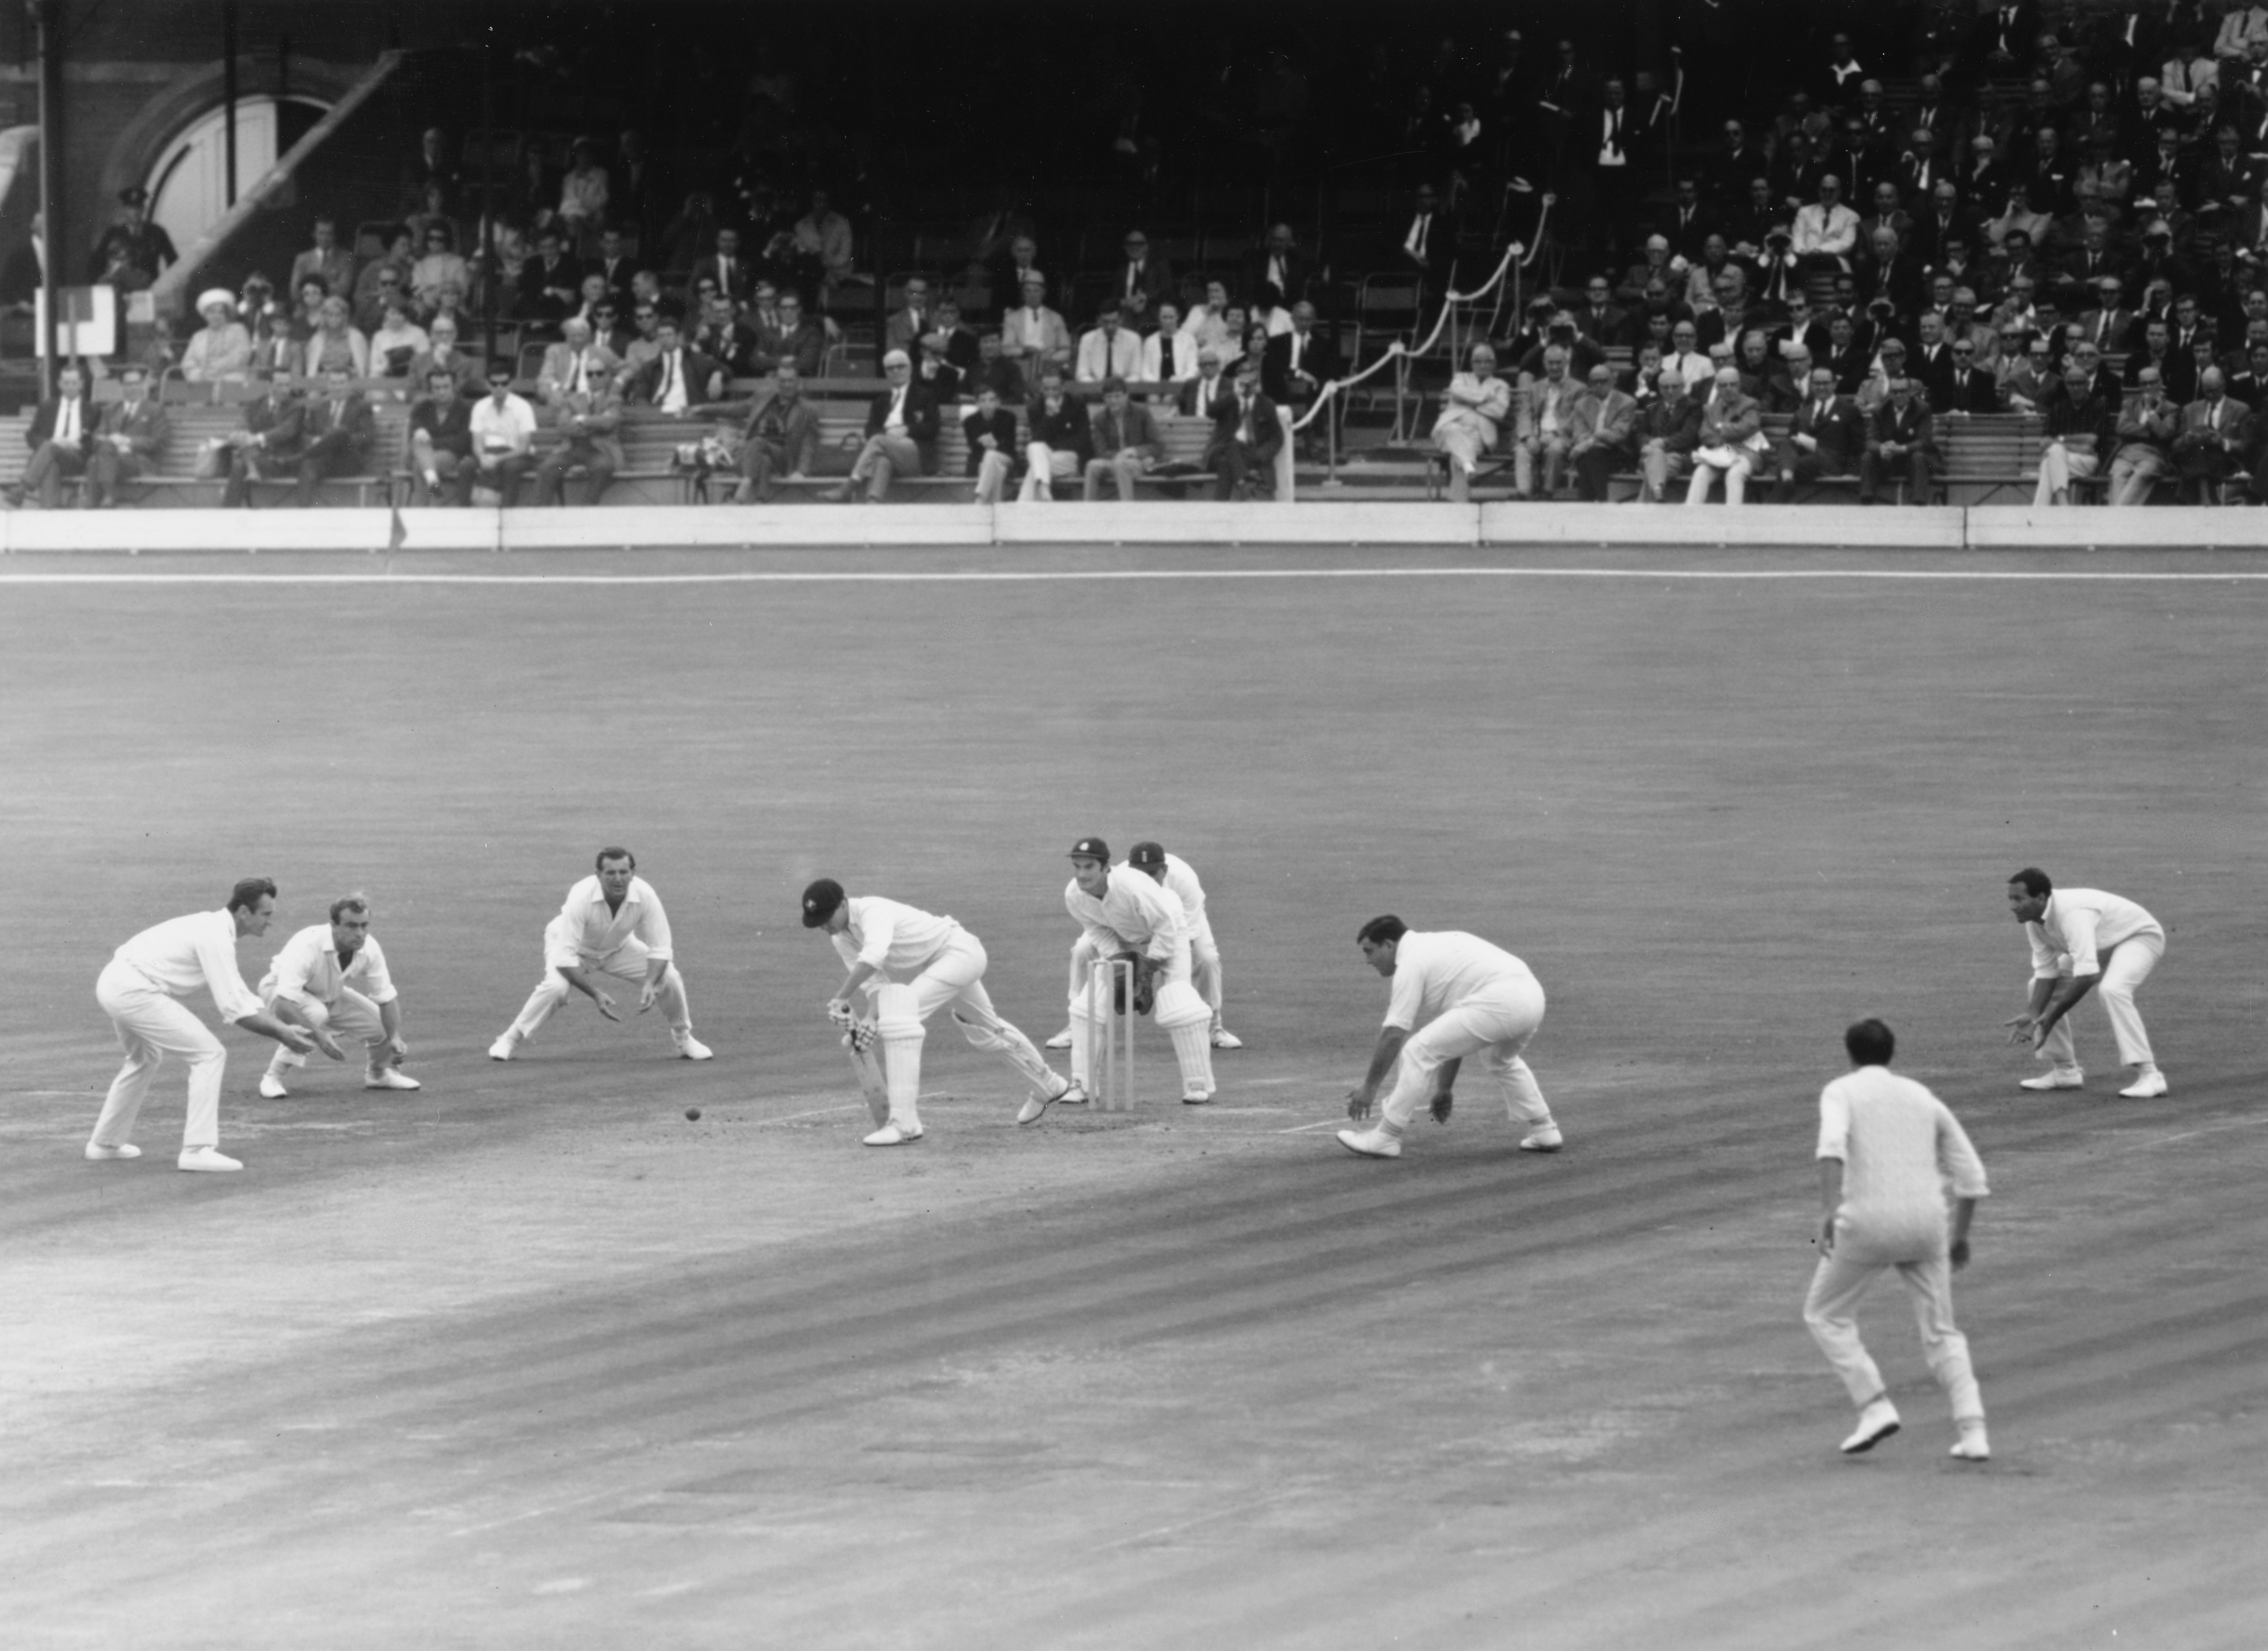 From left: Ted Dexter, John Edrich, Tom Graveney, Alan Knott, Colin Cowdrey, Colin Milburn and Basil D'Oliveira of England surround Australia’s Ashley Mallett as he plays a forward defensive at the Oval in 1968